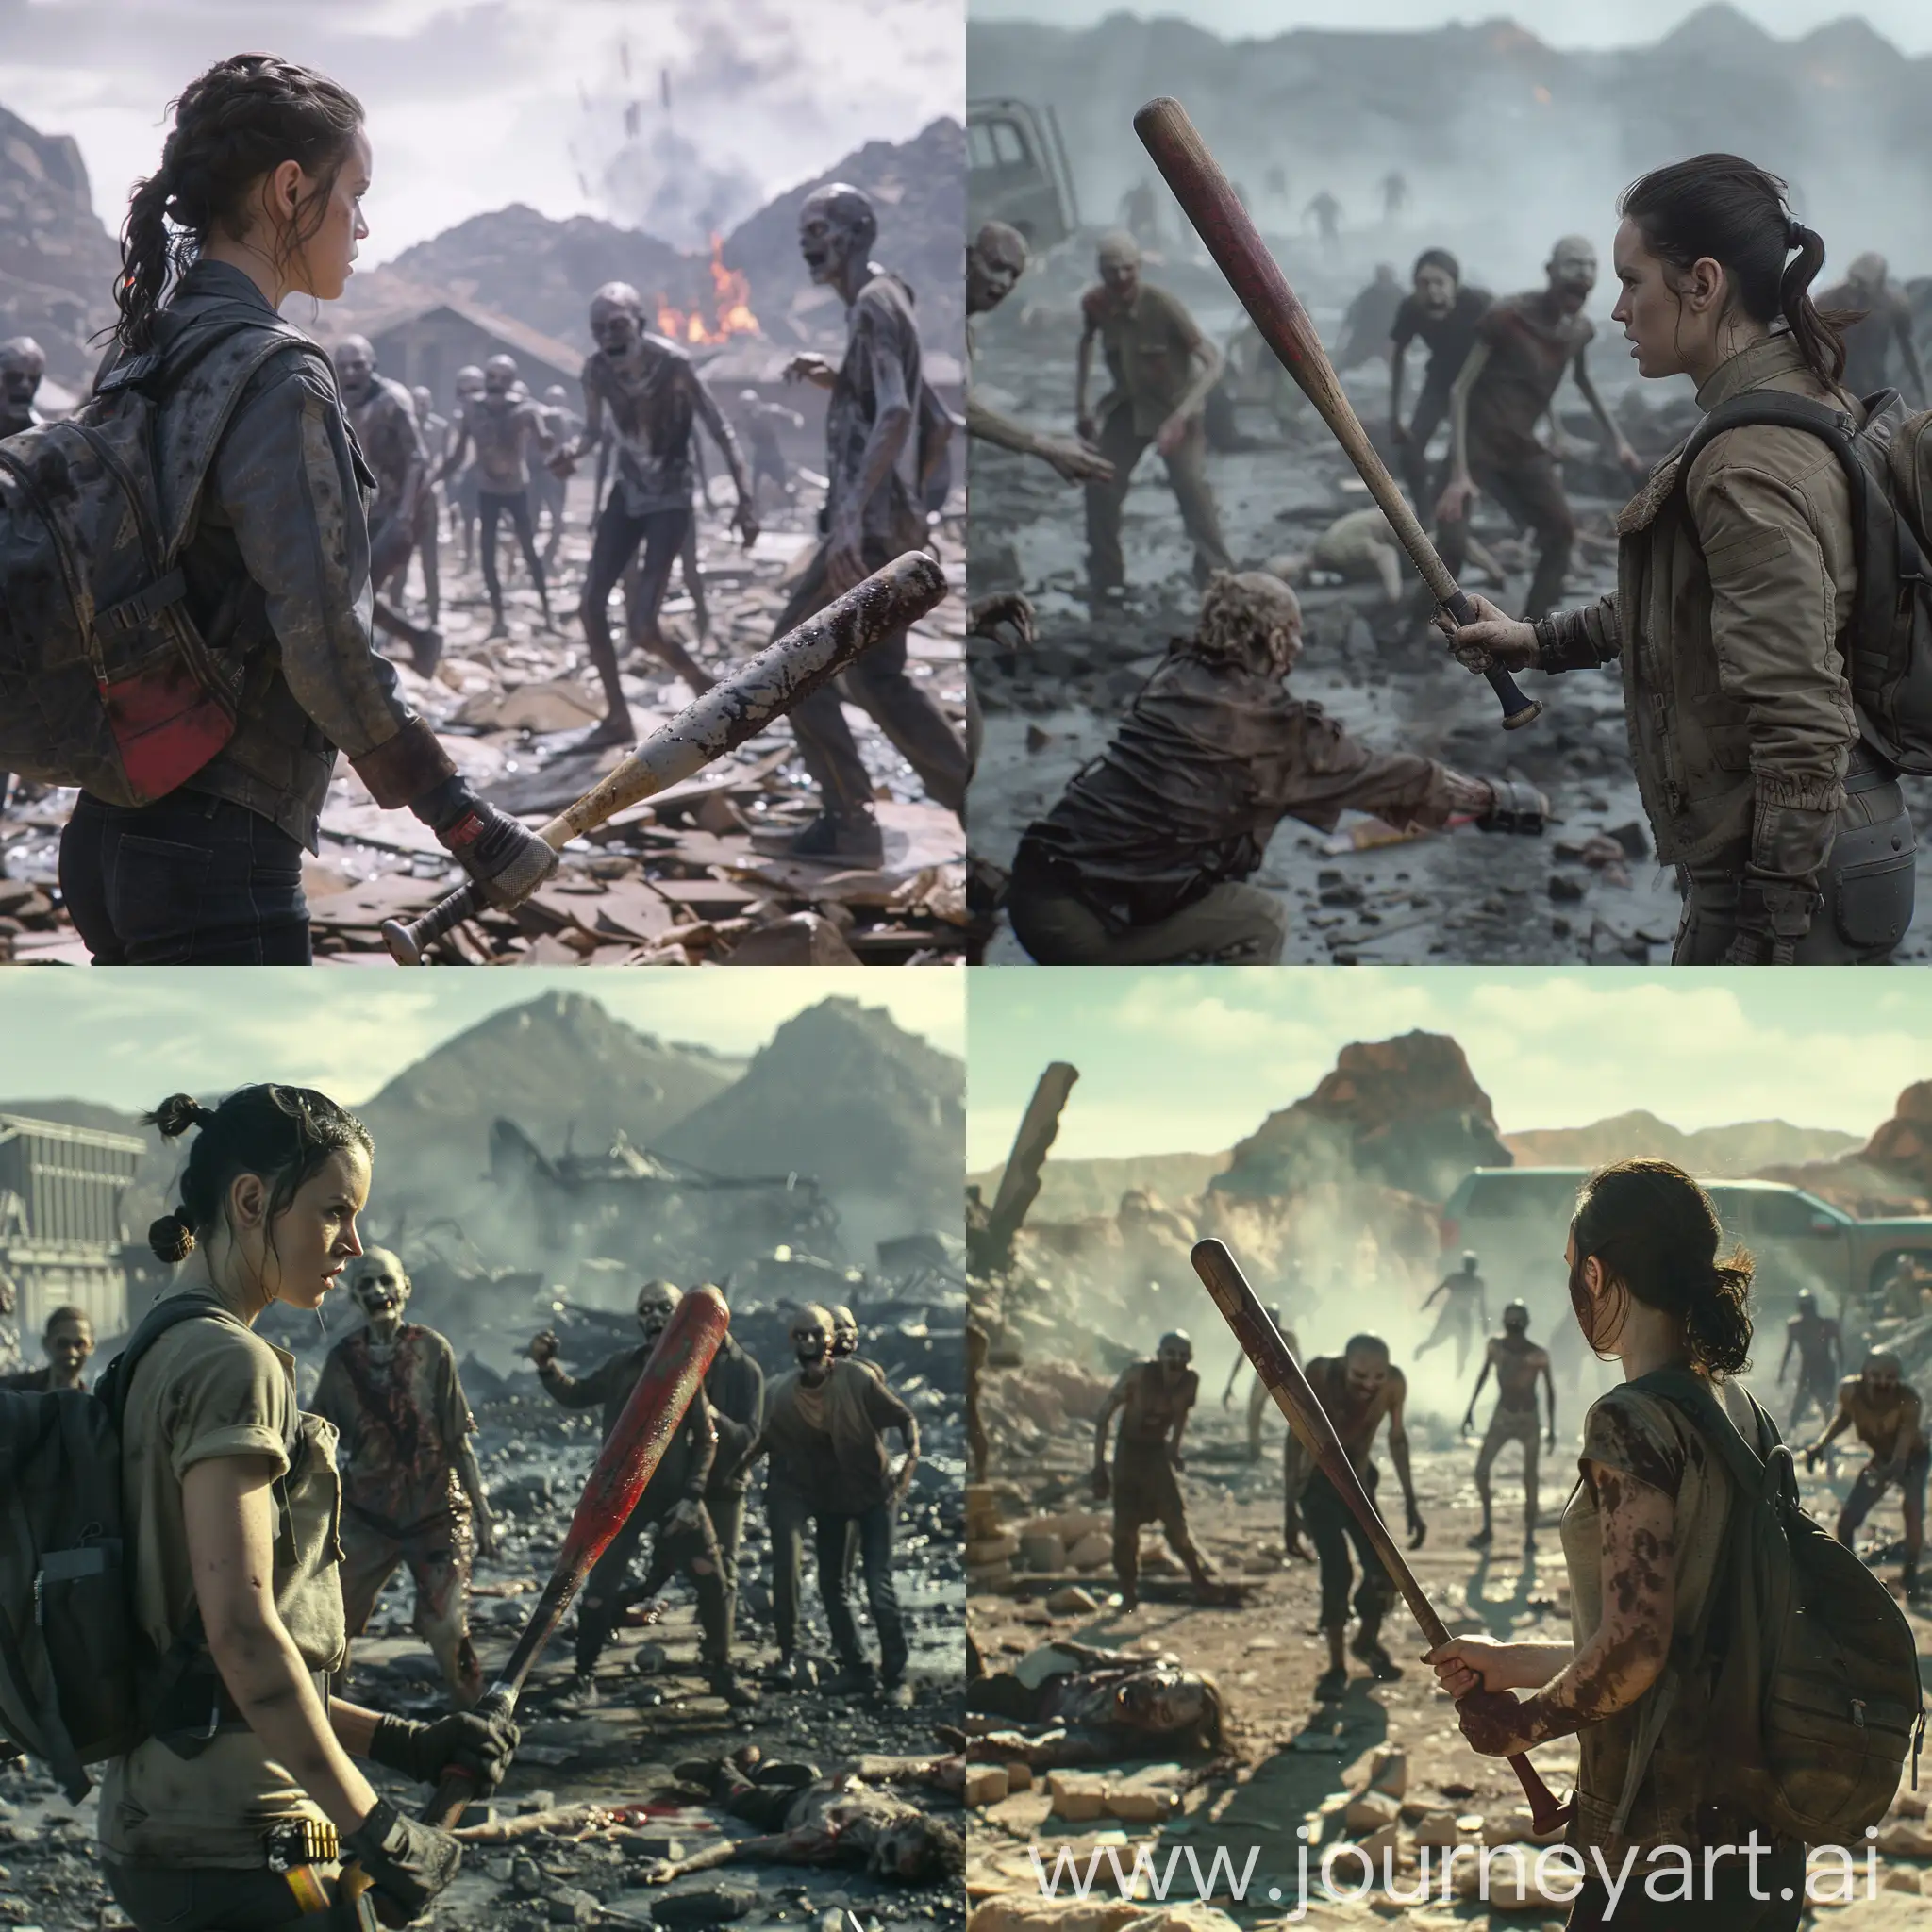 images from a film with Daisy Ridley as the protagonist facing several zombies with a baseball bat in a devastated environment, 8k resolution, cinematic image, realistic 